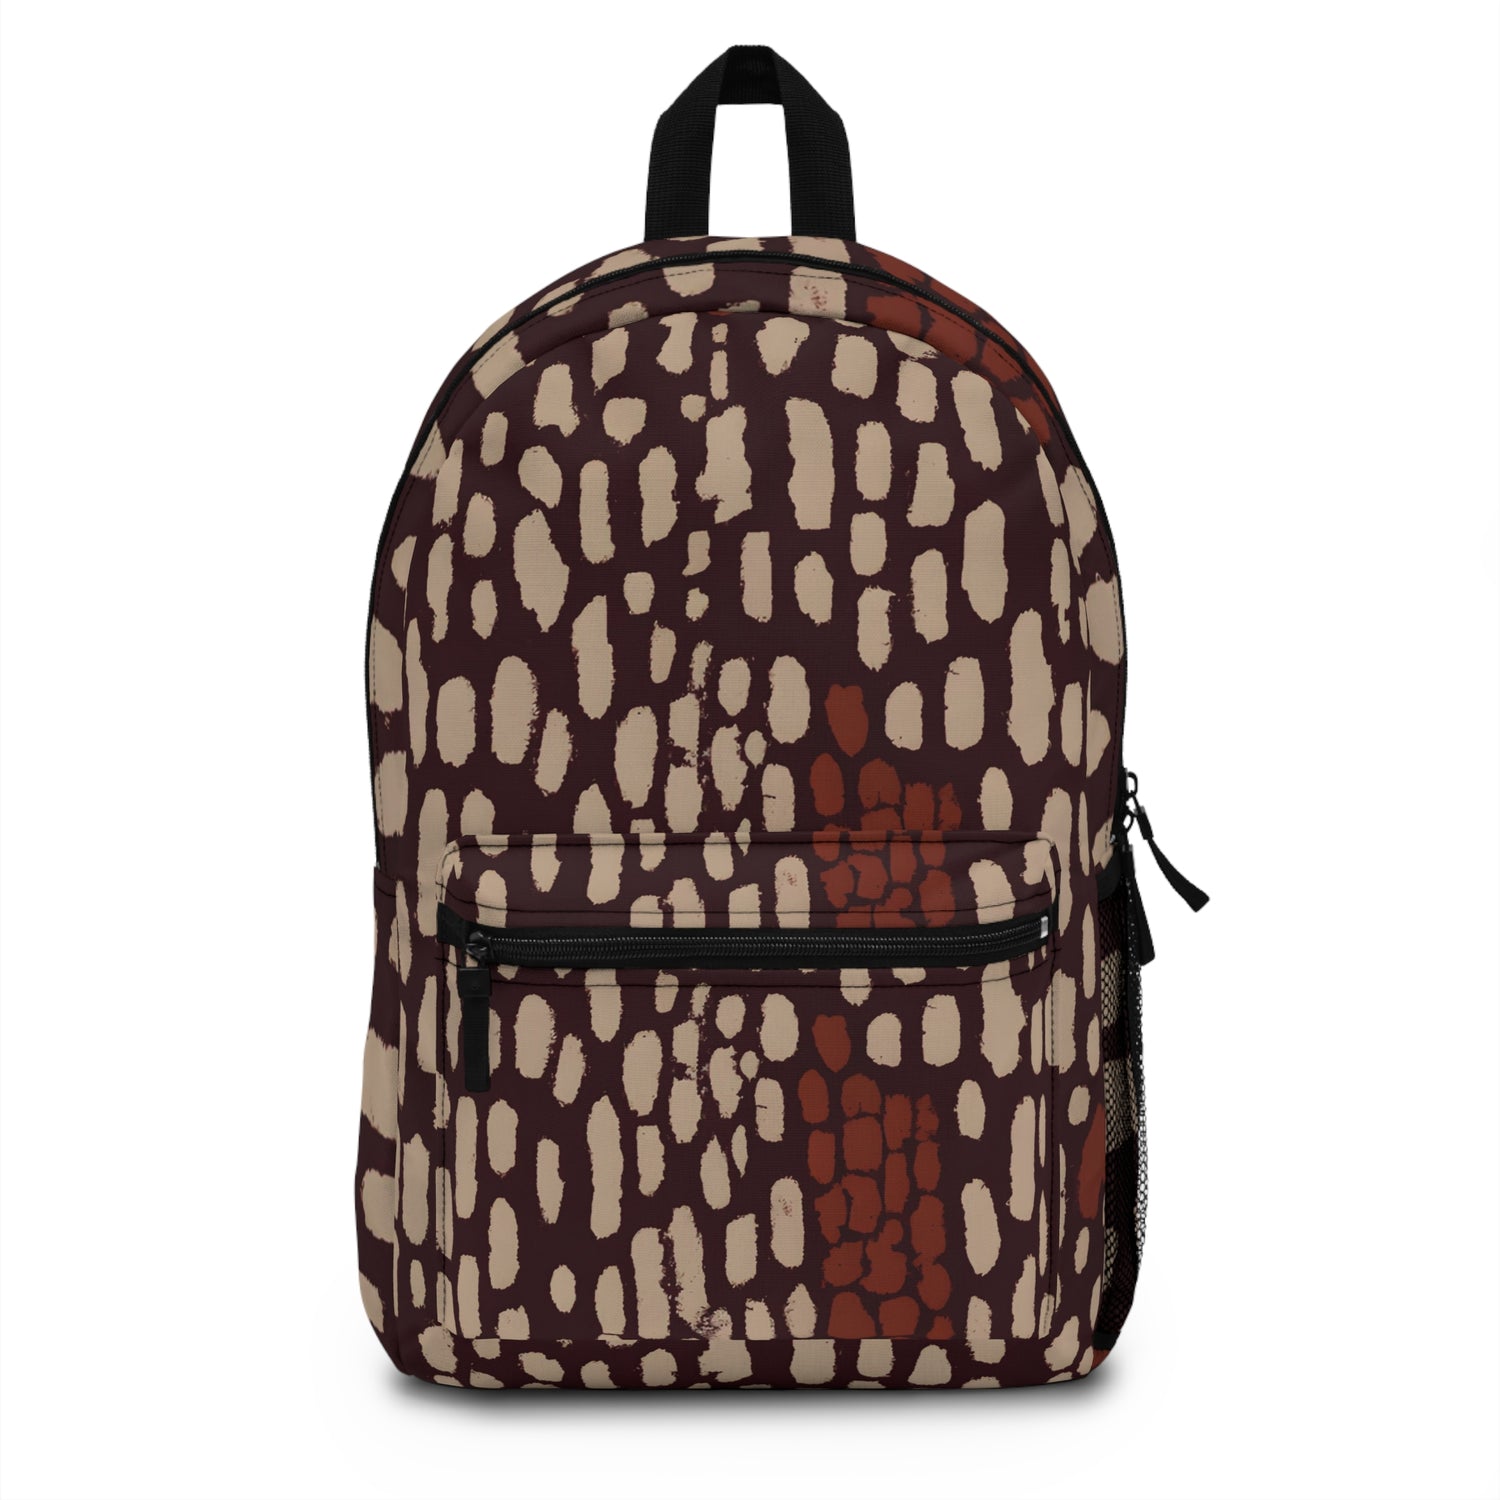 Designer Textile Art Backpack-Mystic Vision. - Alacrity Prints' Unique, Stylish & Durable CarryOn- Perfect for Everyday Adventures